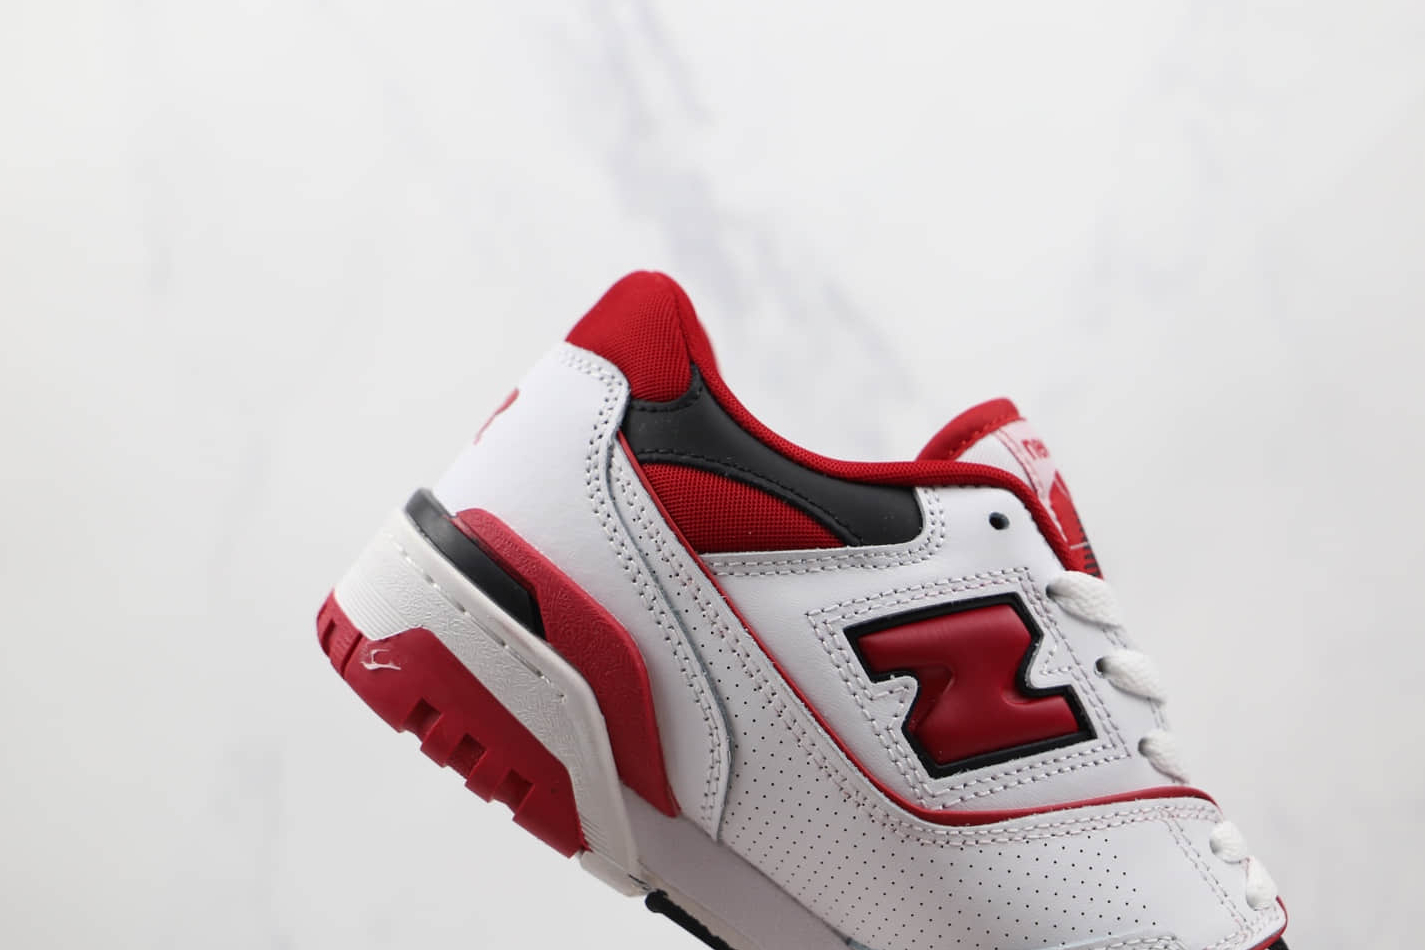 New Balance 550 'White Team Red' Sneakers - Shop Now!